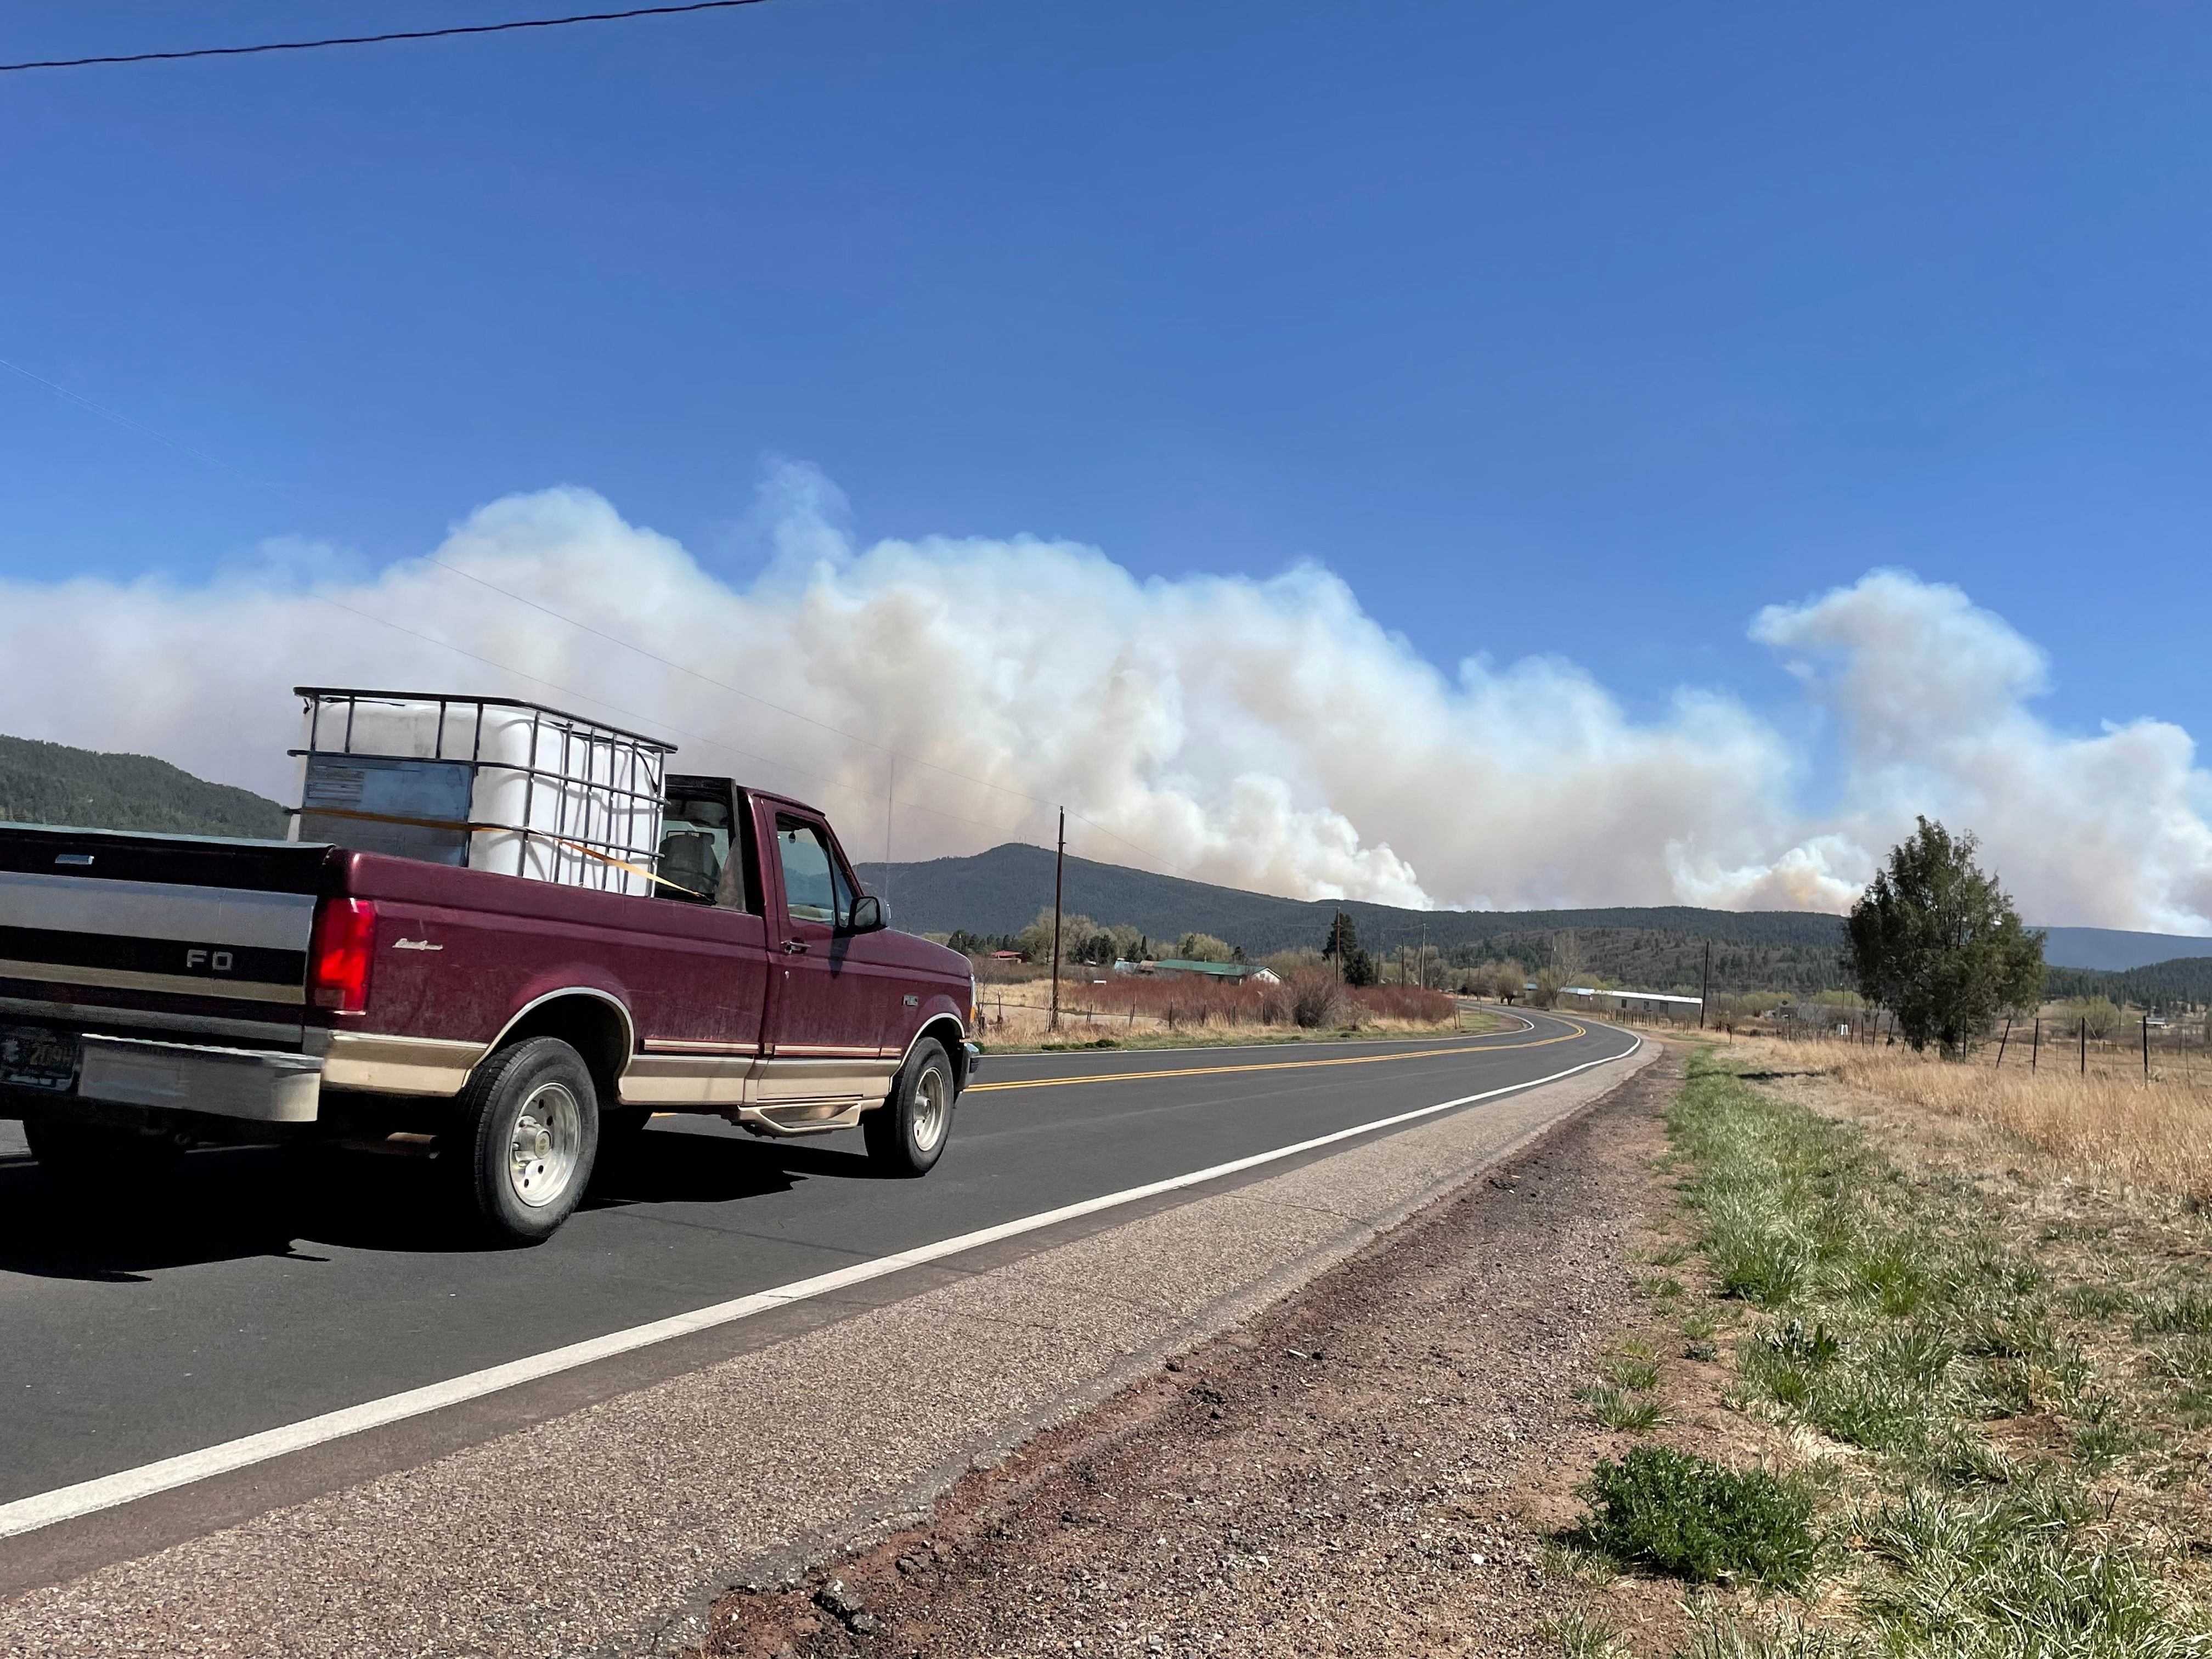 New Mexico battles "epic" wildfire